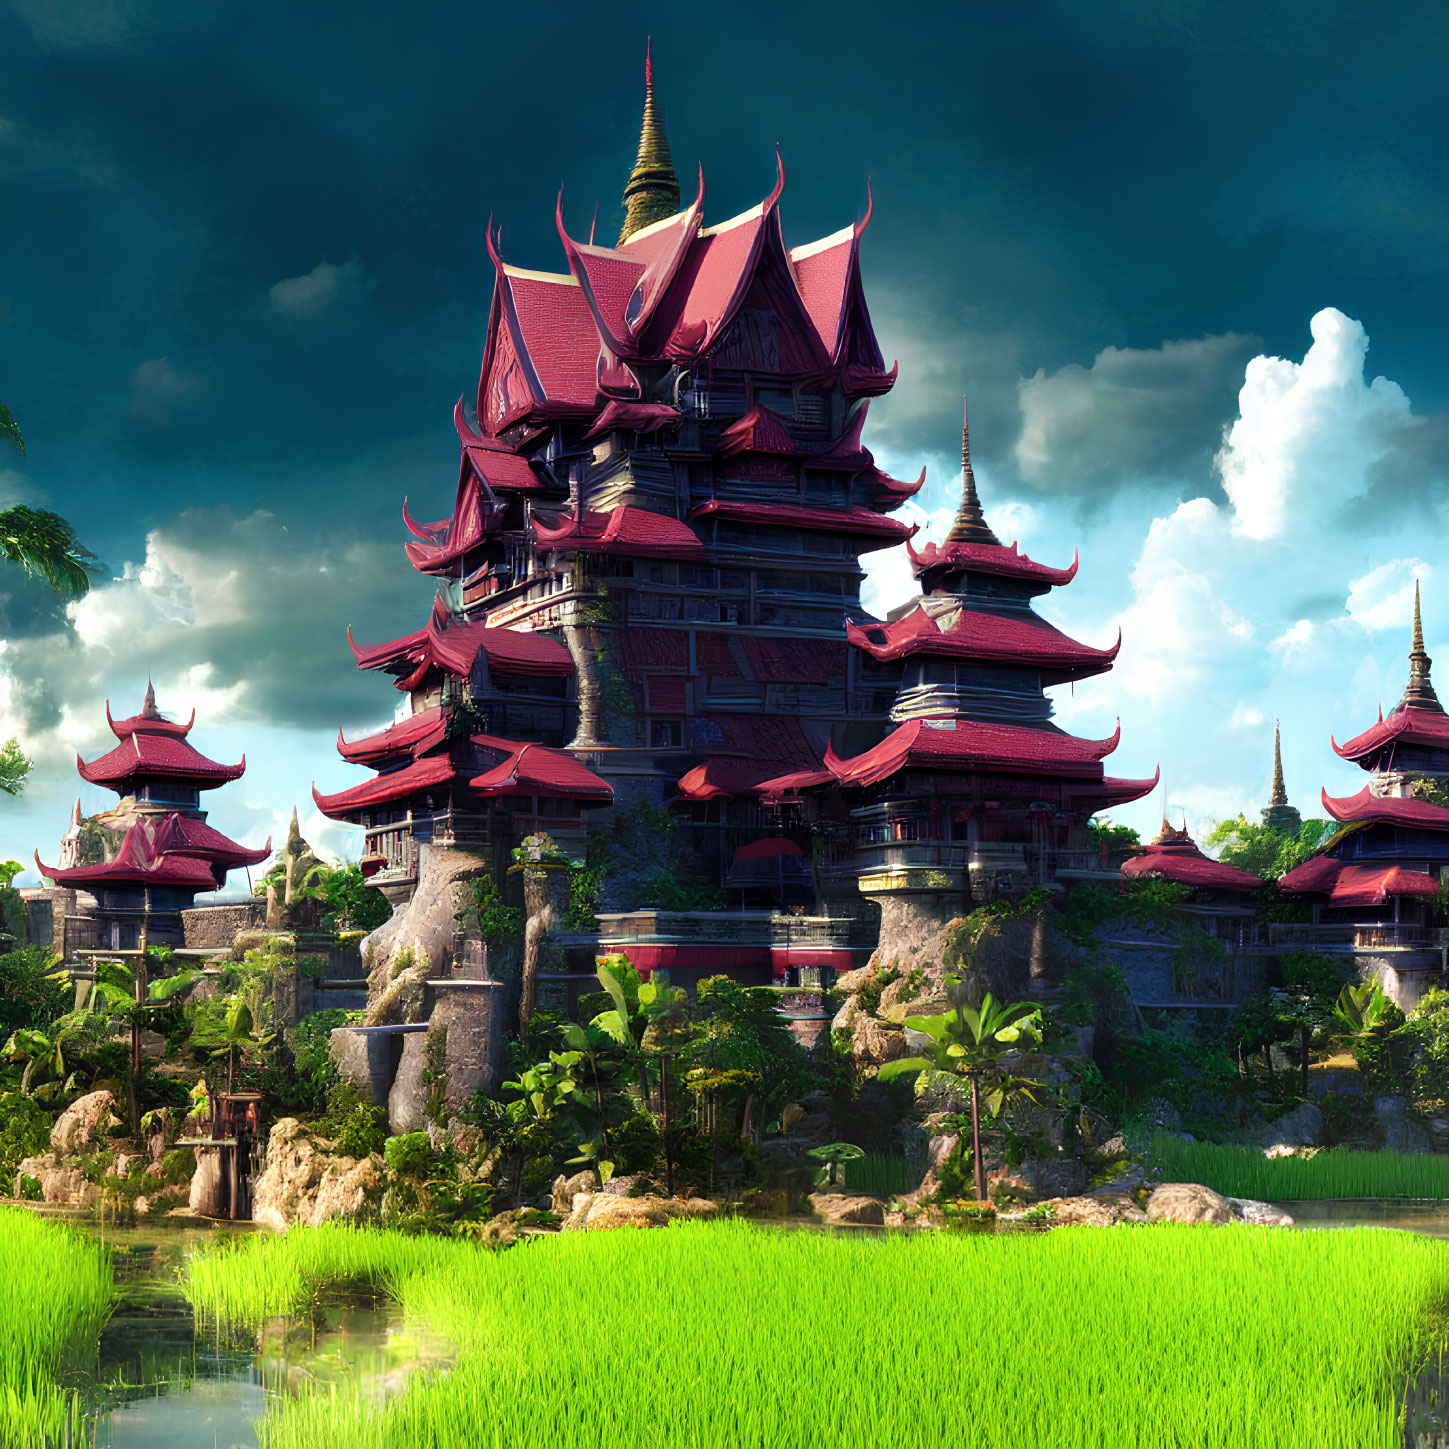 Fantasy-style palace with red roofs in lush greenery and rice paddies